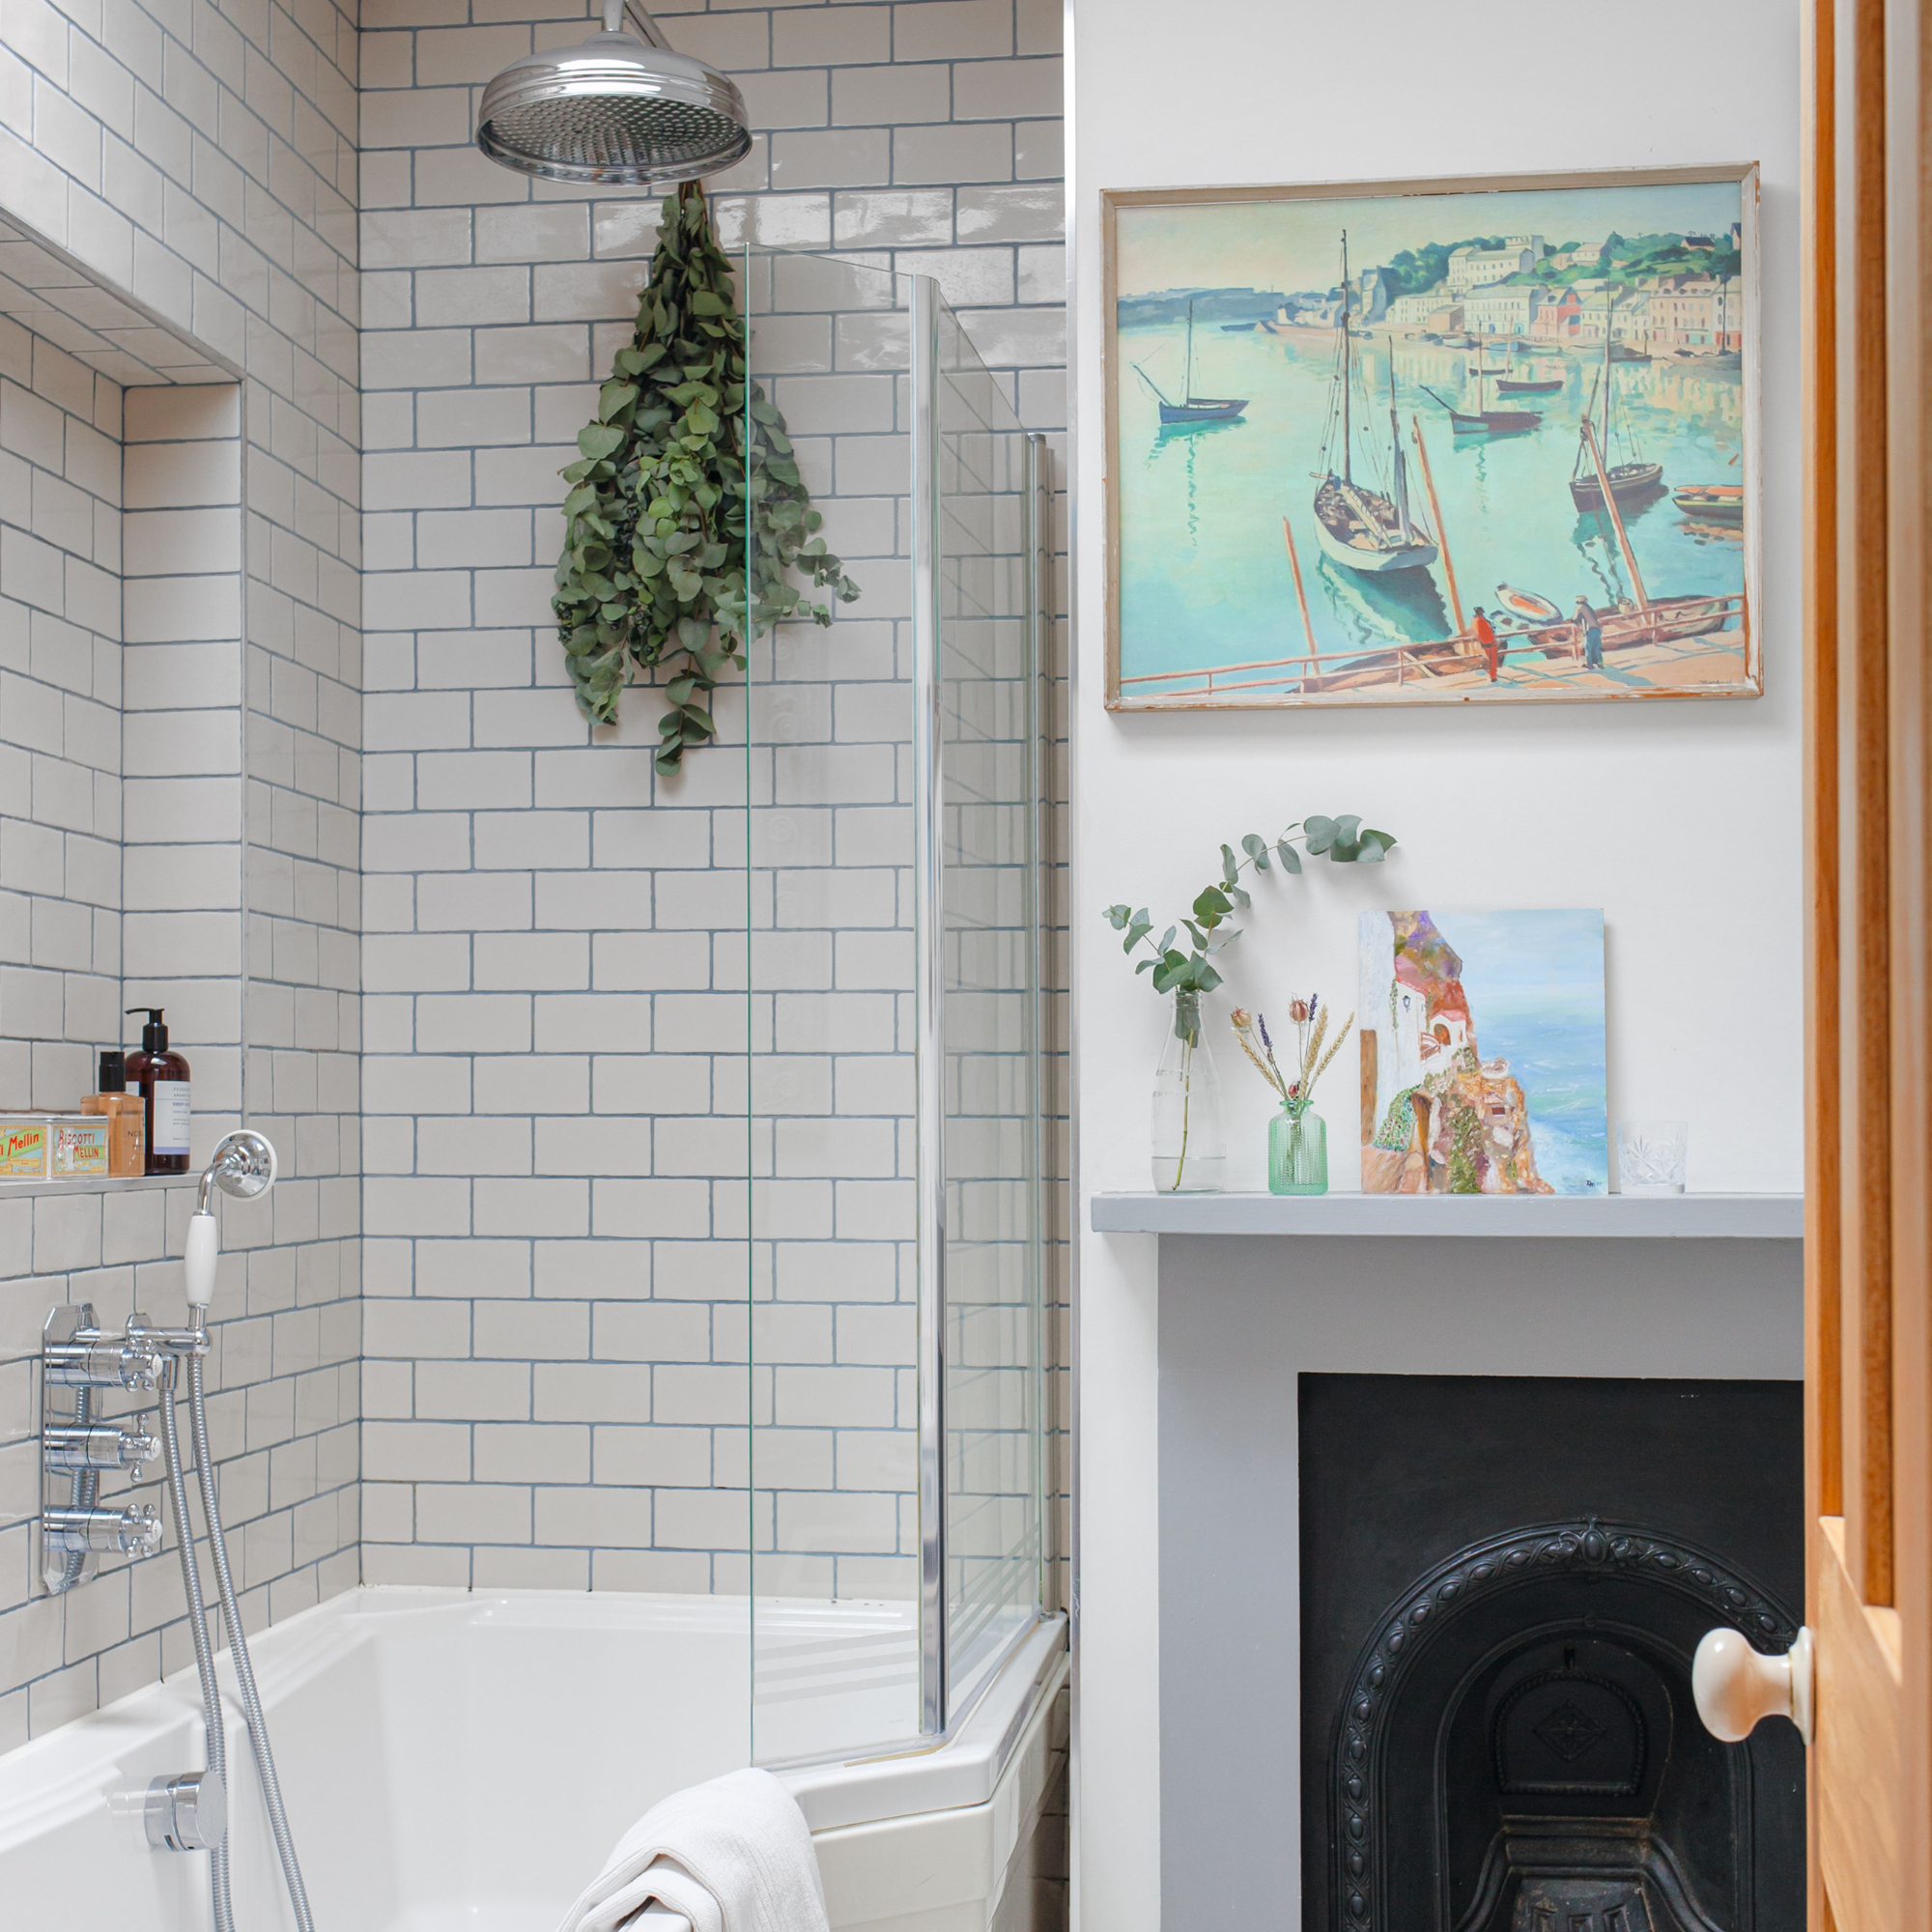 Tiled bathroom and bathtub shower, next to fireplace and hanging artwork